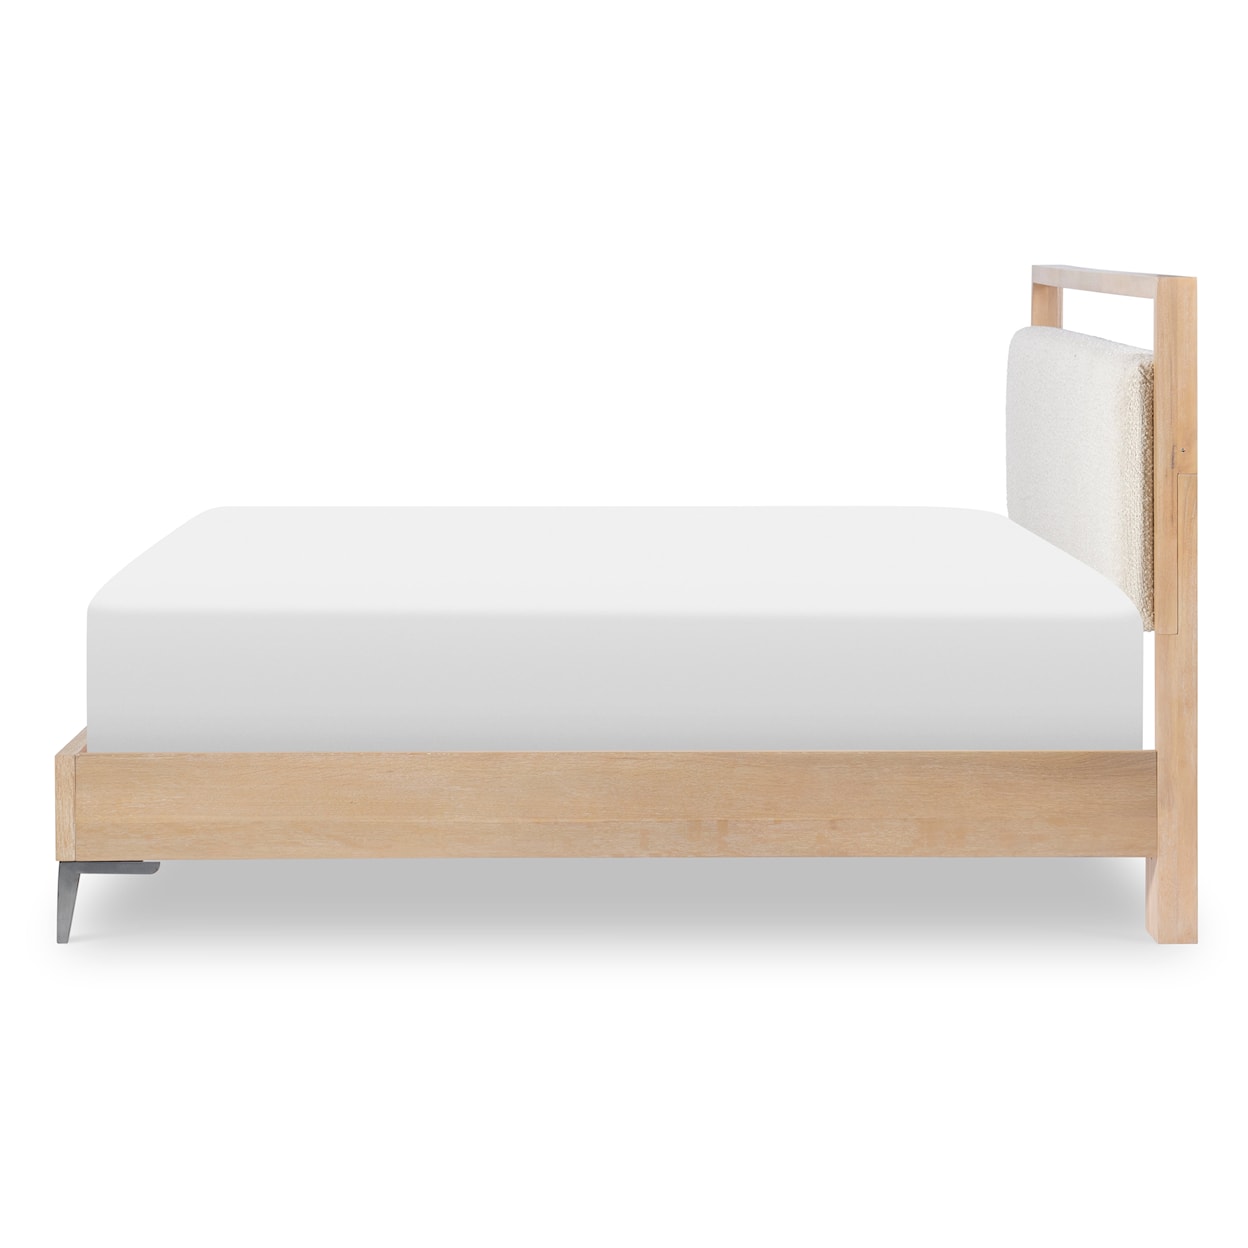 Legacy Classic Biscayne Upholstered Queen Bed